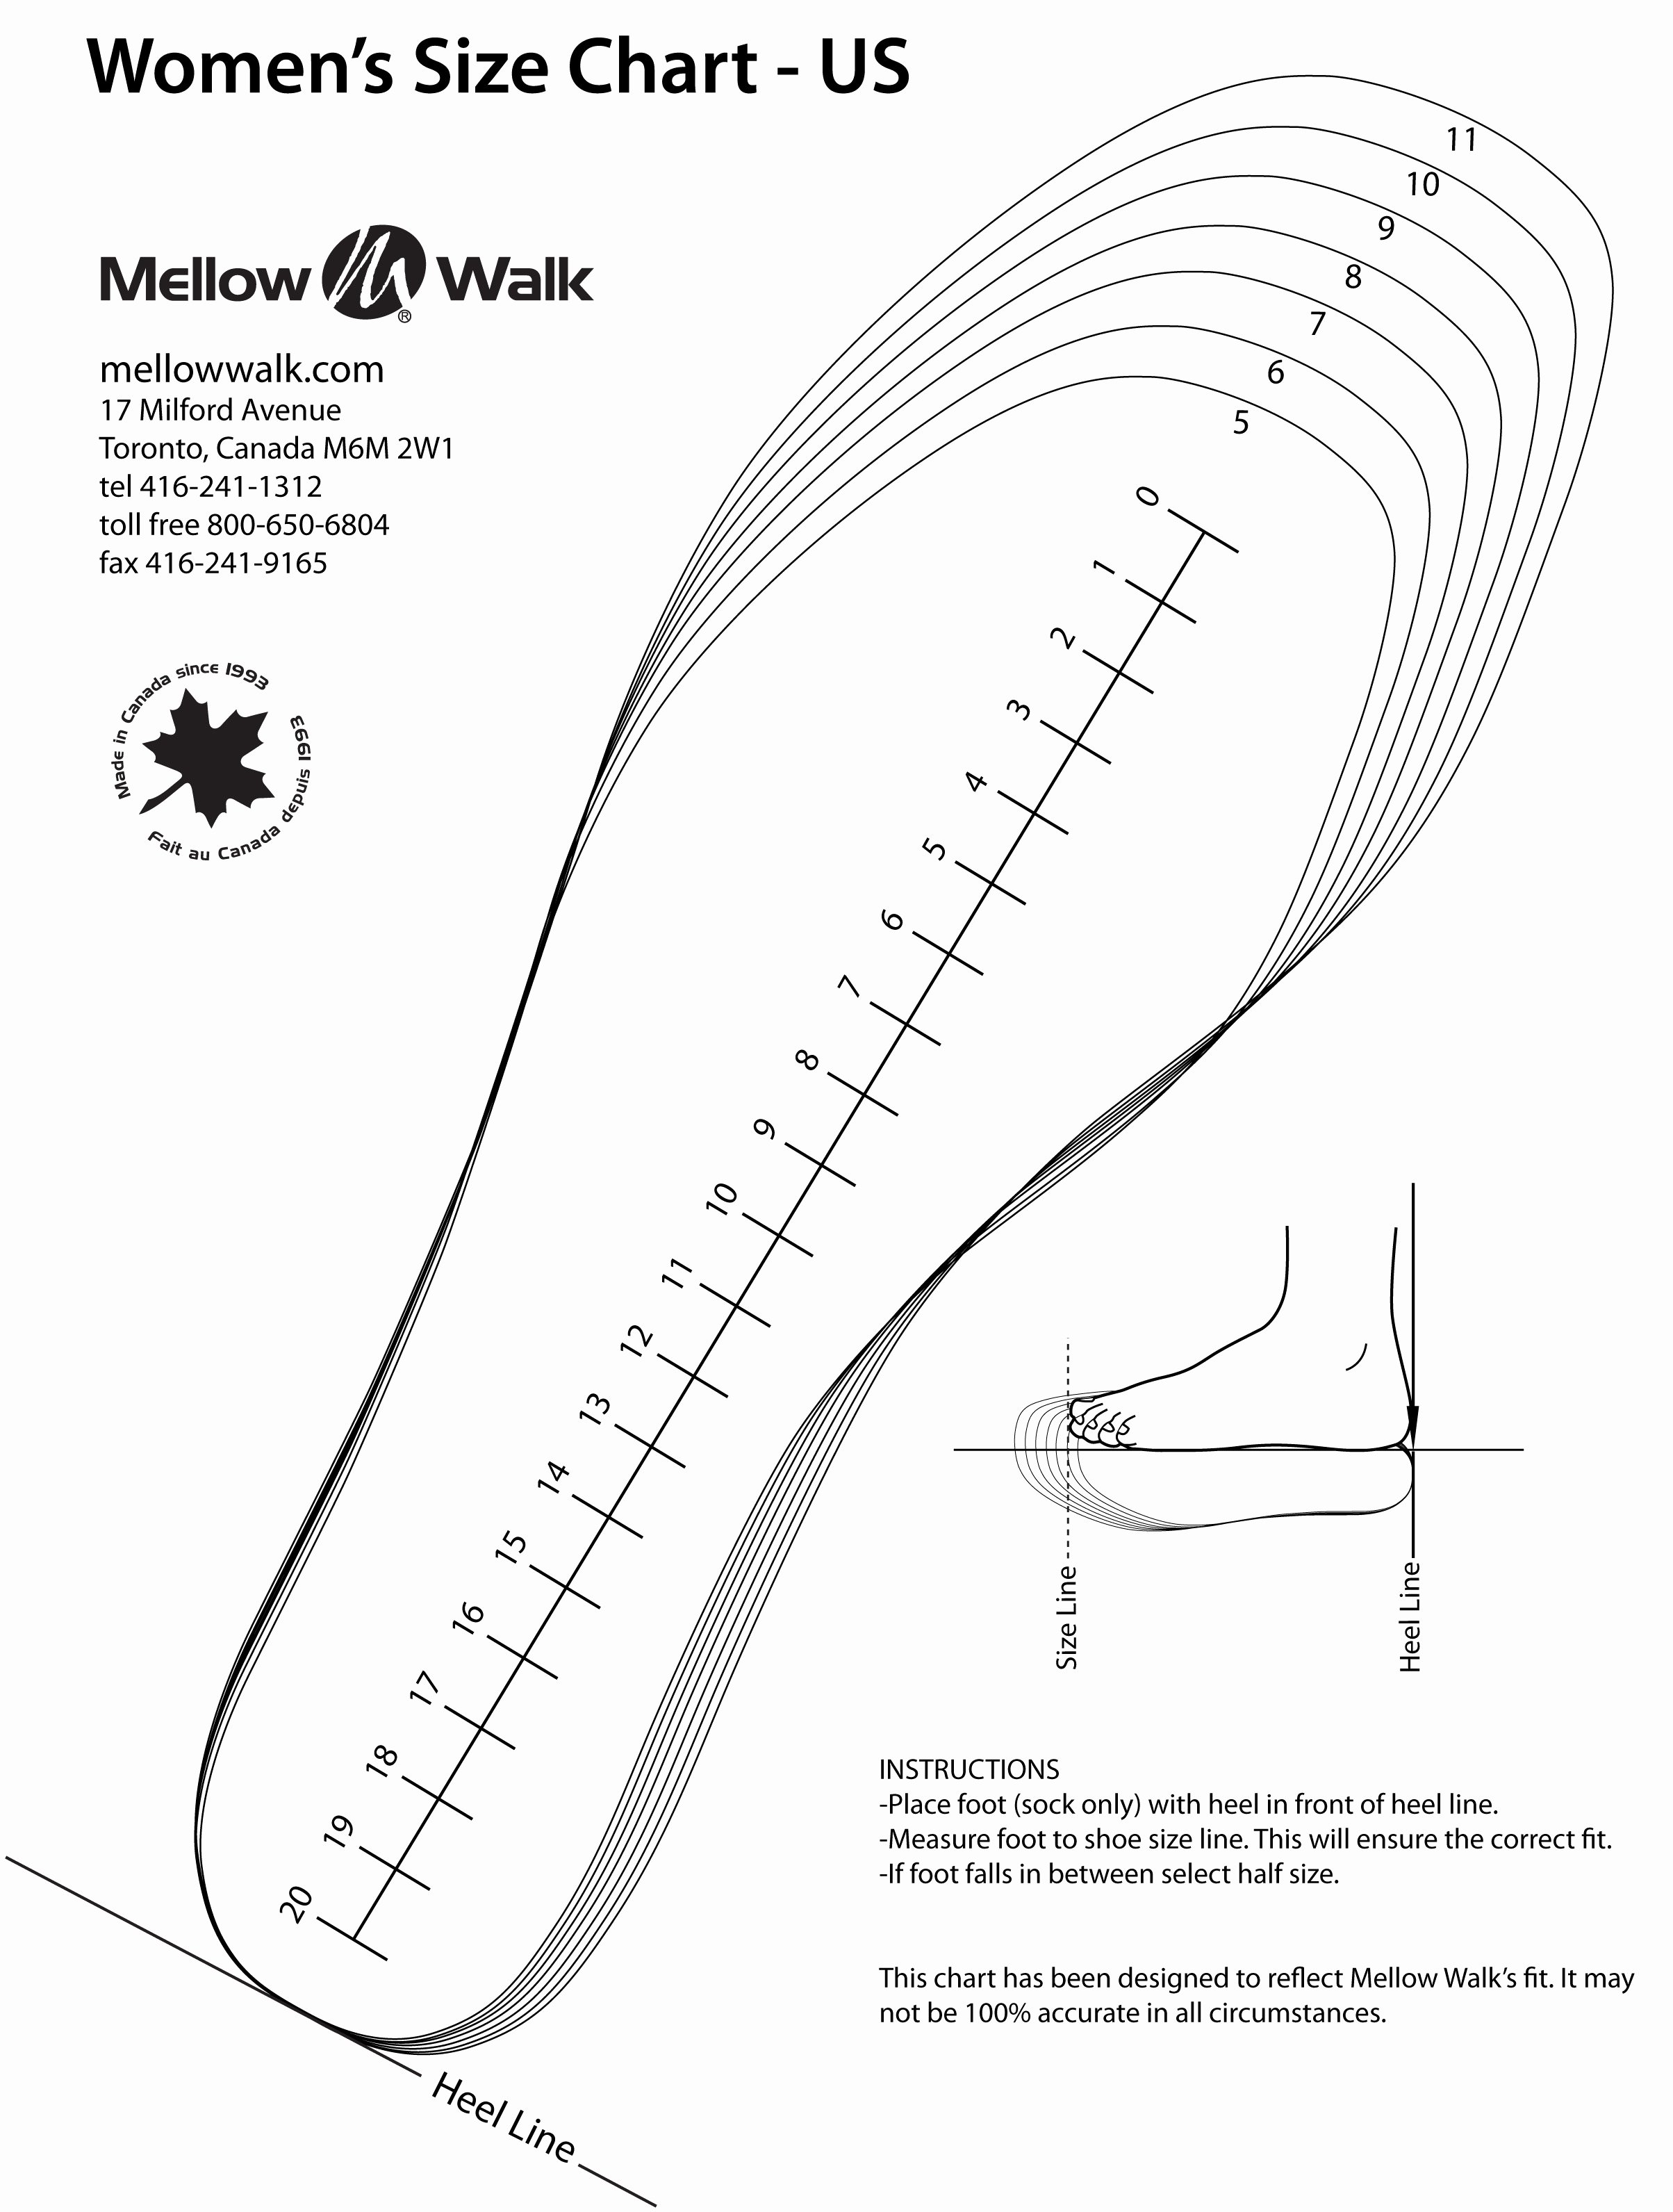 Foot Measurement Chart Printable Best Of Getting the Perfect Mellow Walk Fit is as Easy as 1 2 3